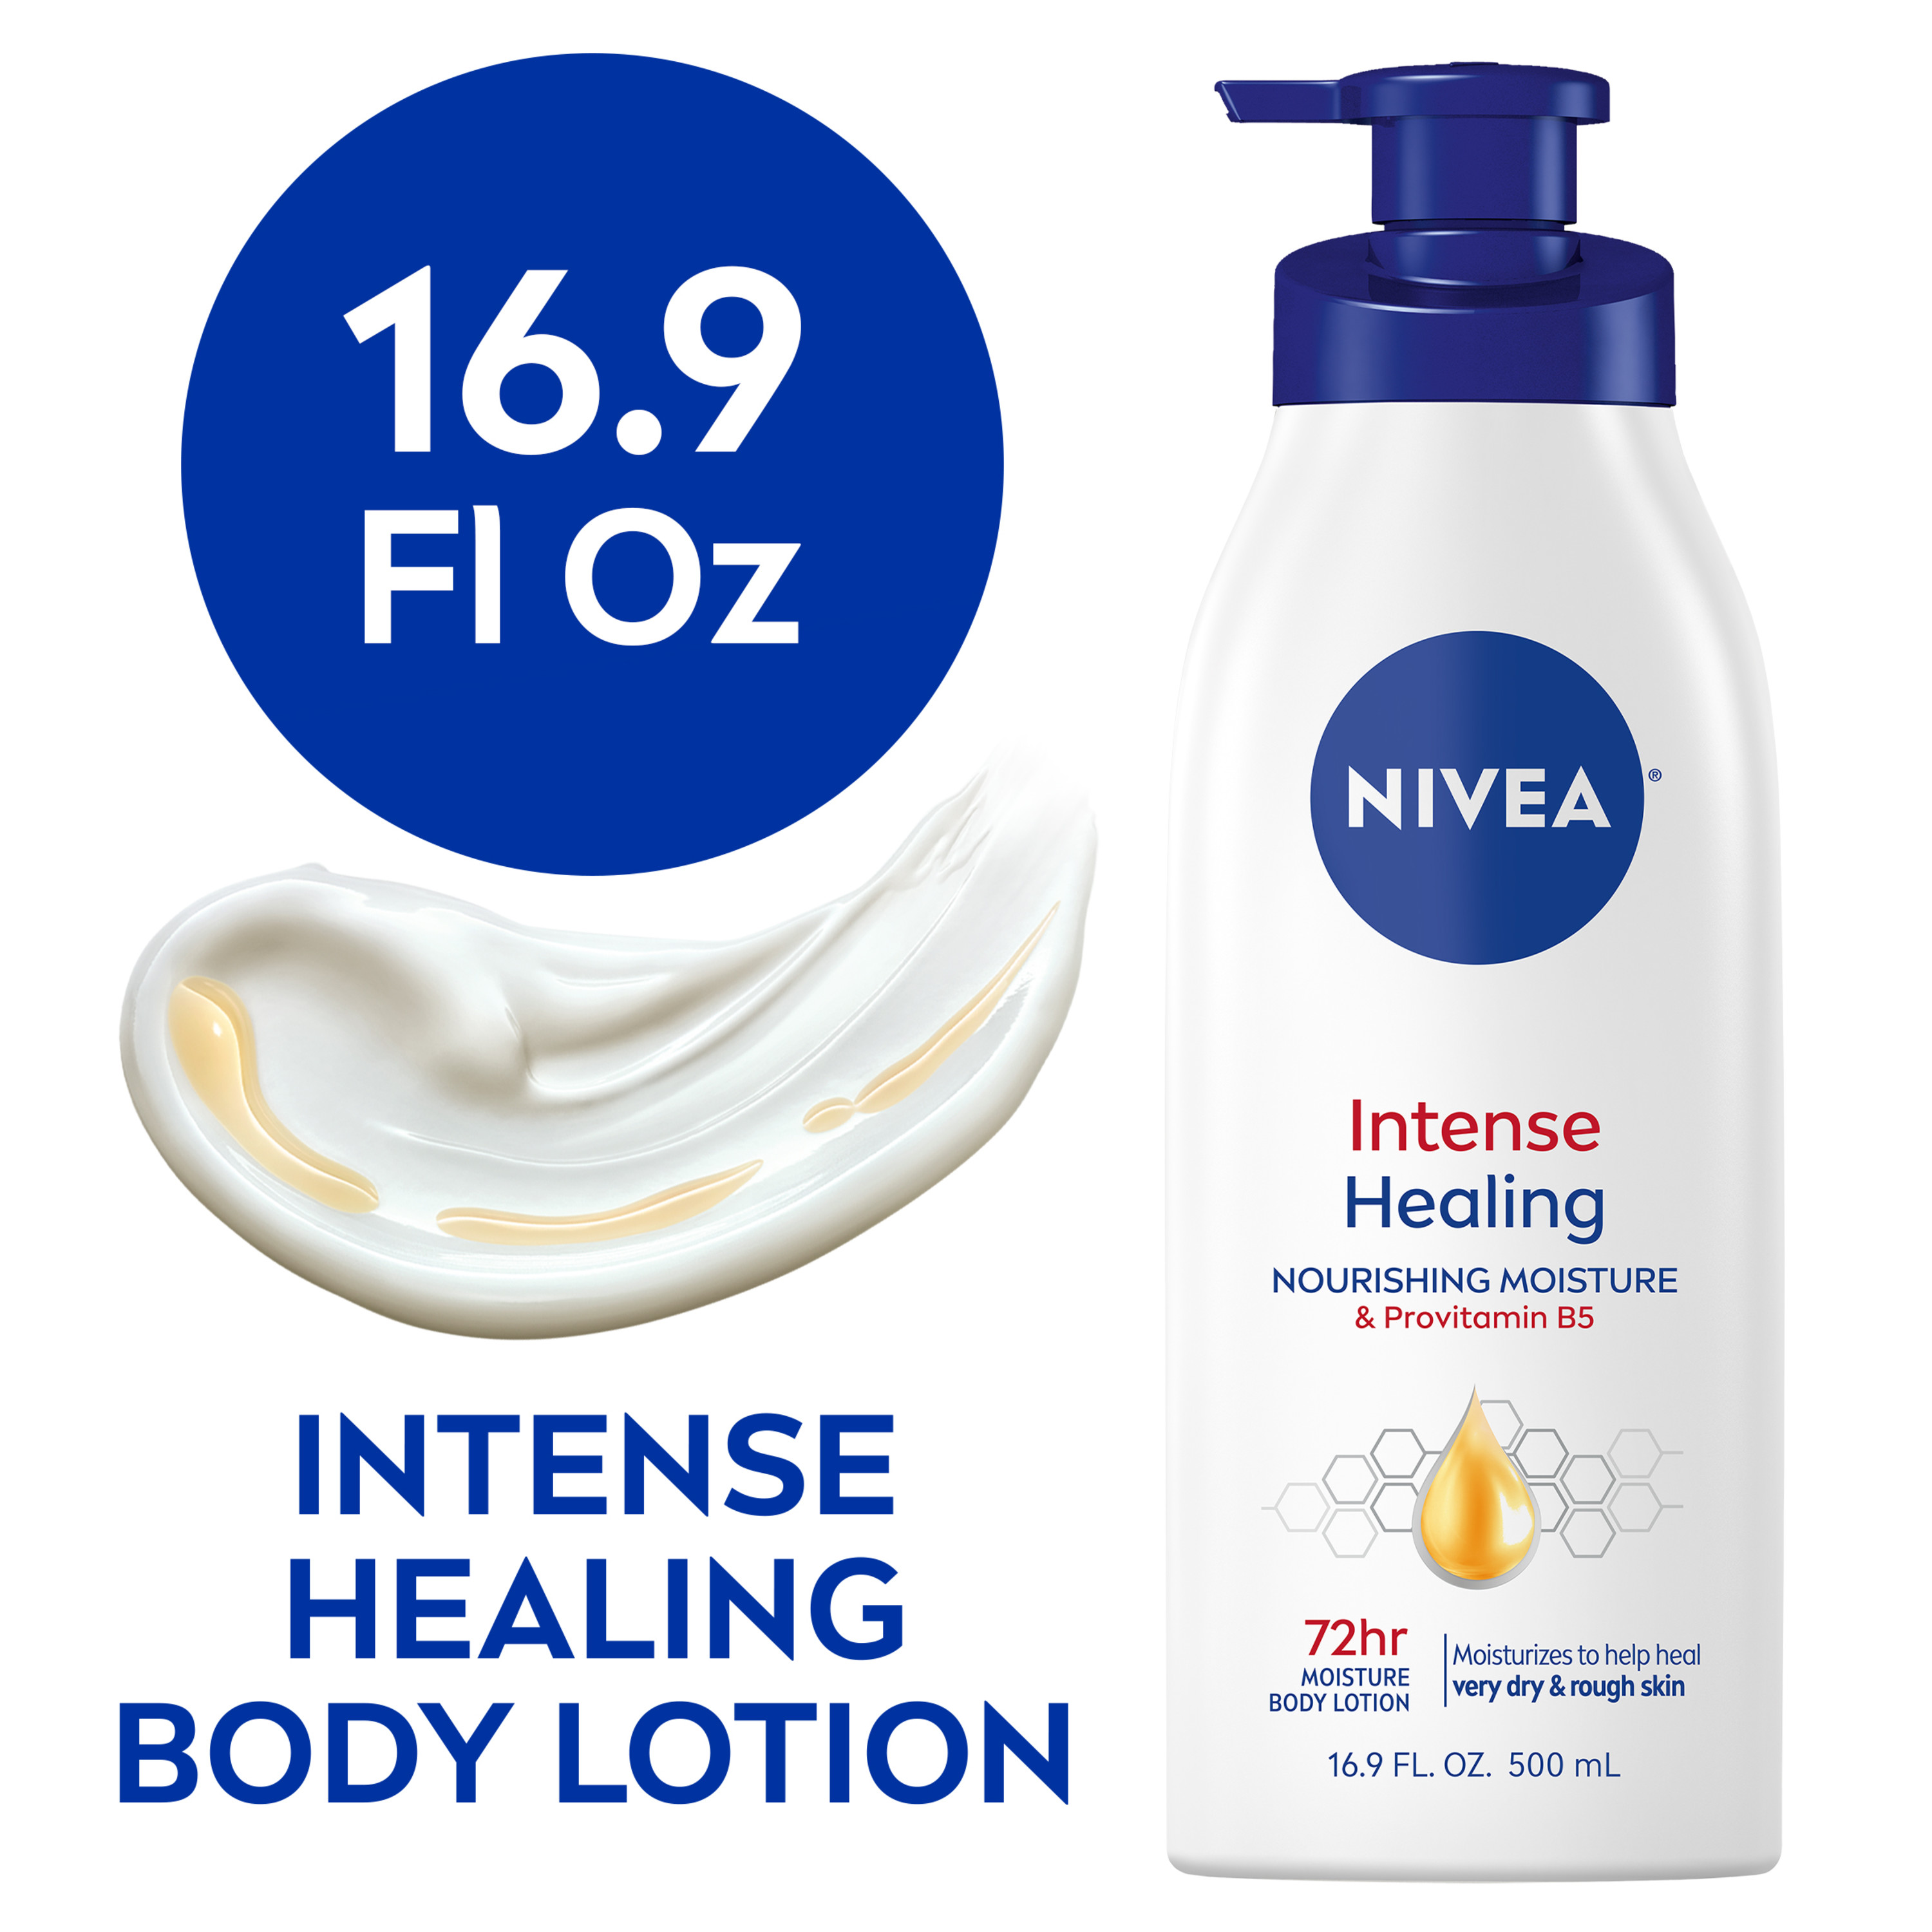 NIVEA Intense Healing Body Lotion, 72 Hour Moisture for Dry to Very Dry Skin, 16.9 Fl Oz Pump Bottle - image 1 of 12